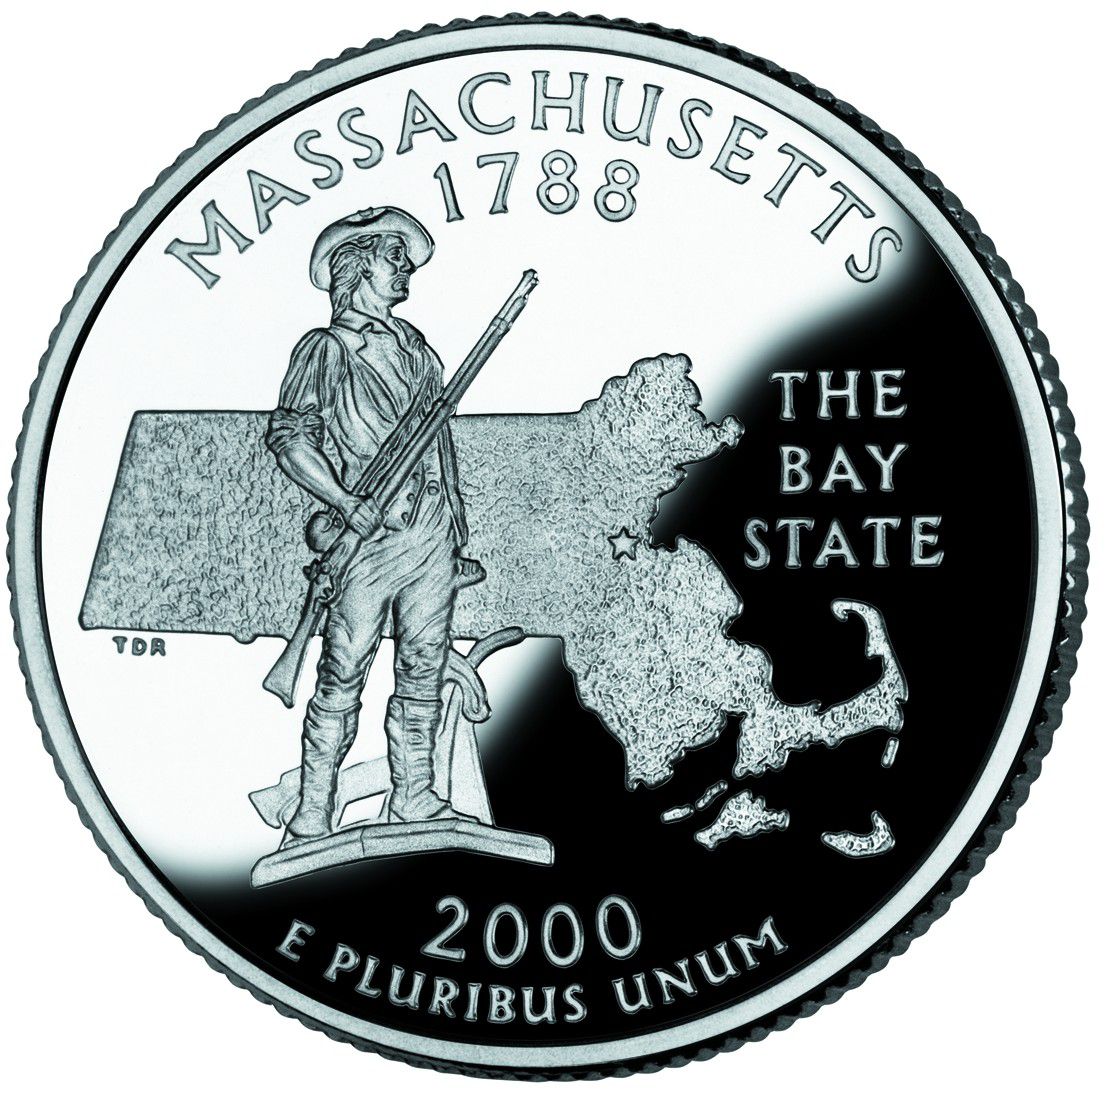 A minuteman statue depicted on the Massachusetts state quarter